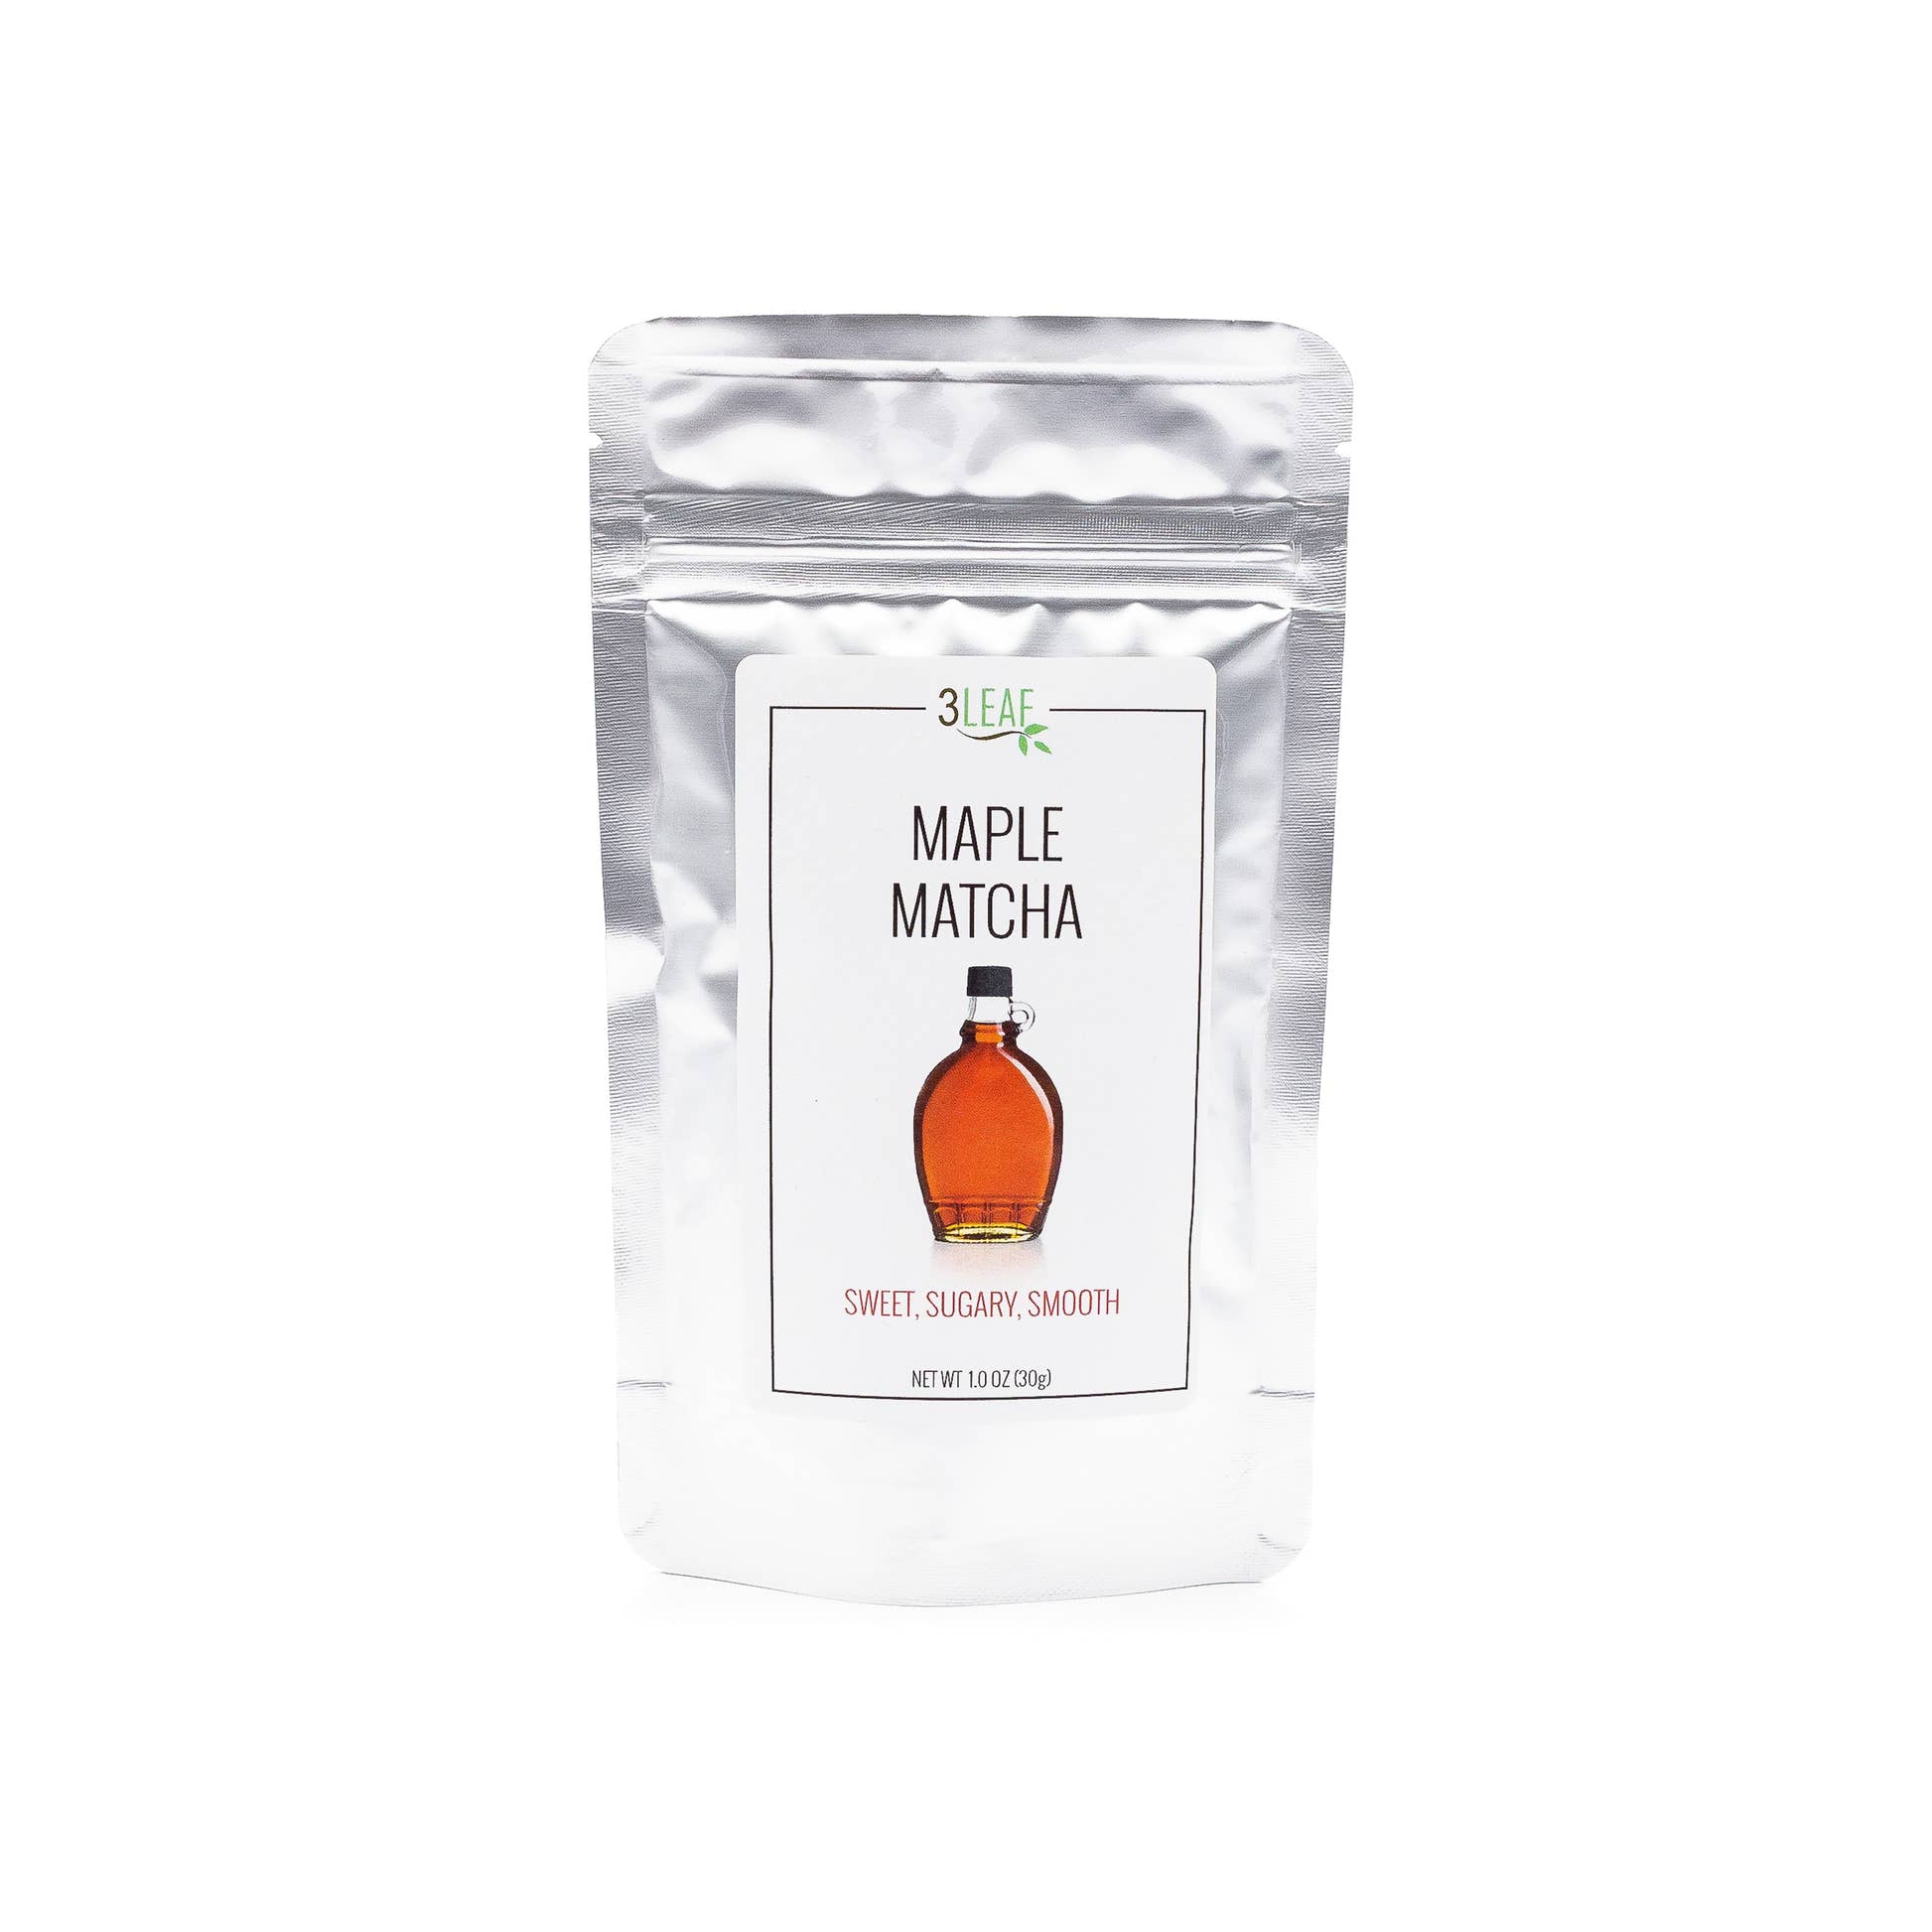 Maple Matcha by 3 Leaf Tea printed pouch with bottle of maple syrup and tea description of sweet, sugary, smooth